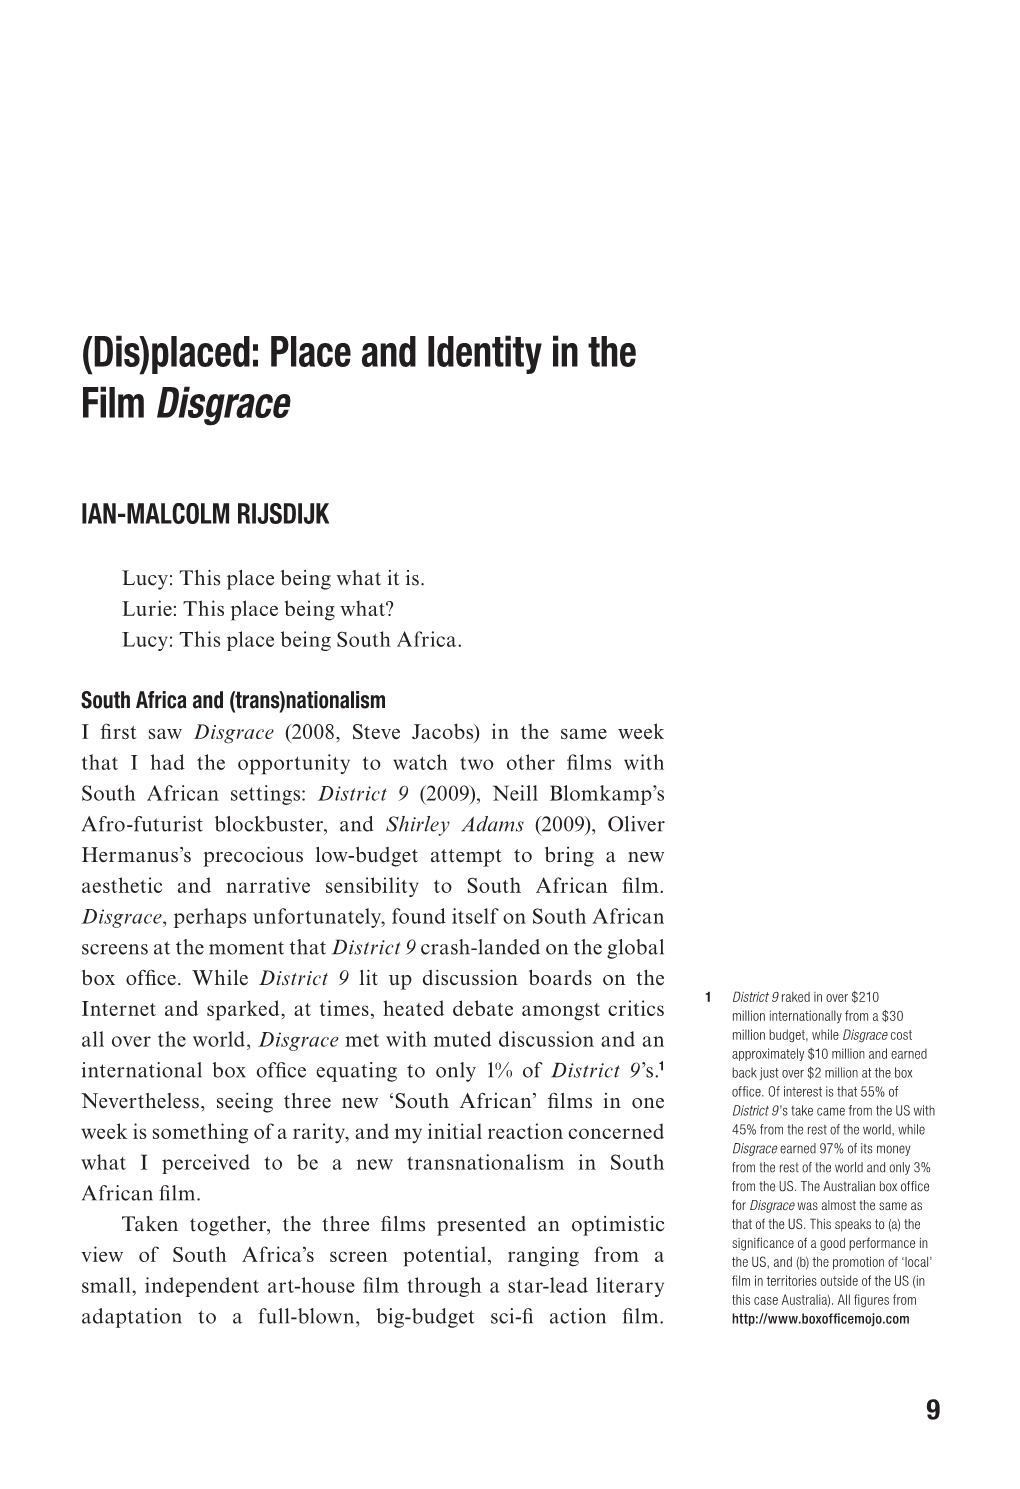 Place and Identity in the Film Disgrace